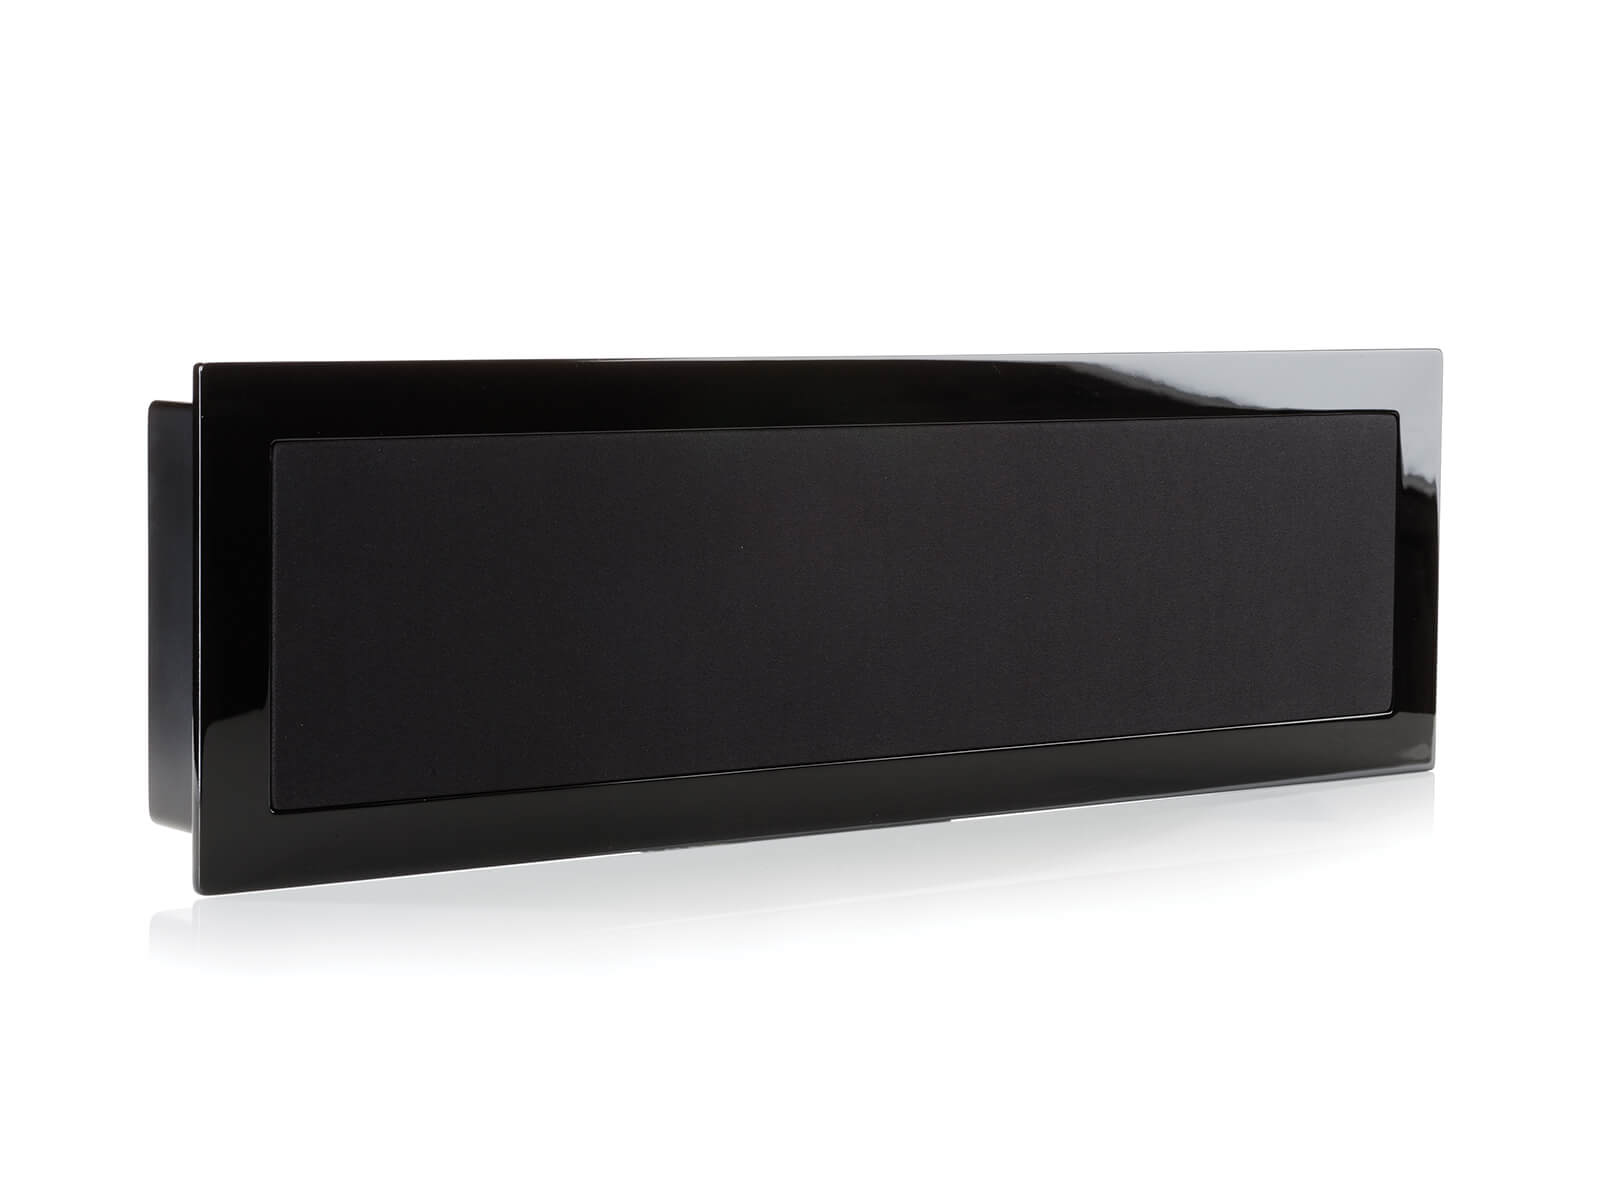 SoundFrame SF1, on-wall speakers, horizontal with a high gloss black lacquer finish.